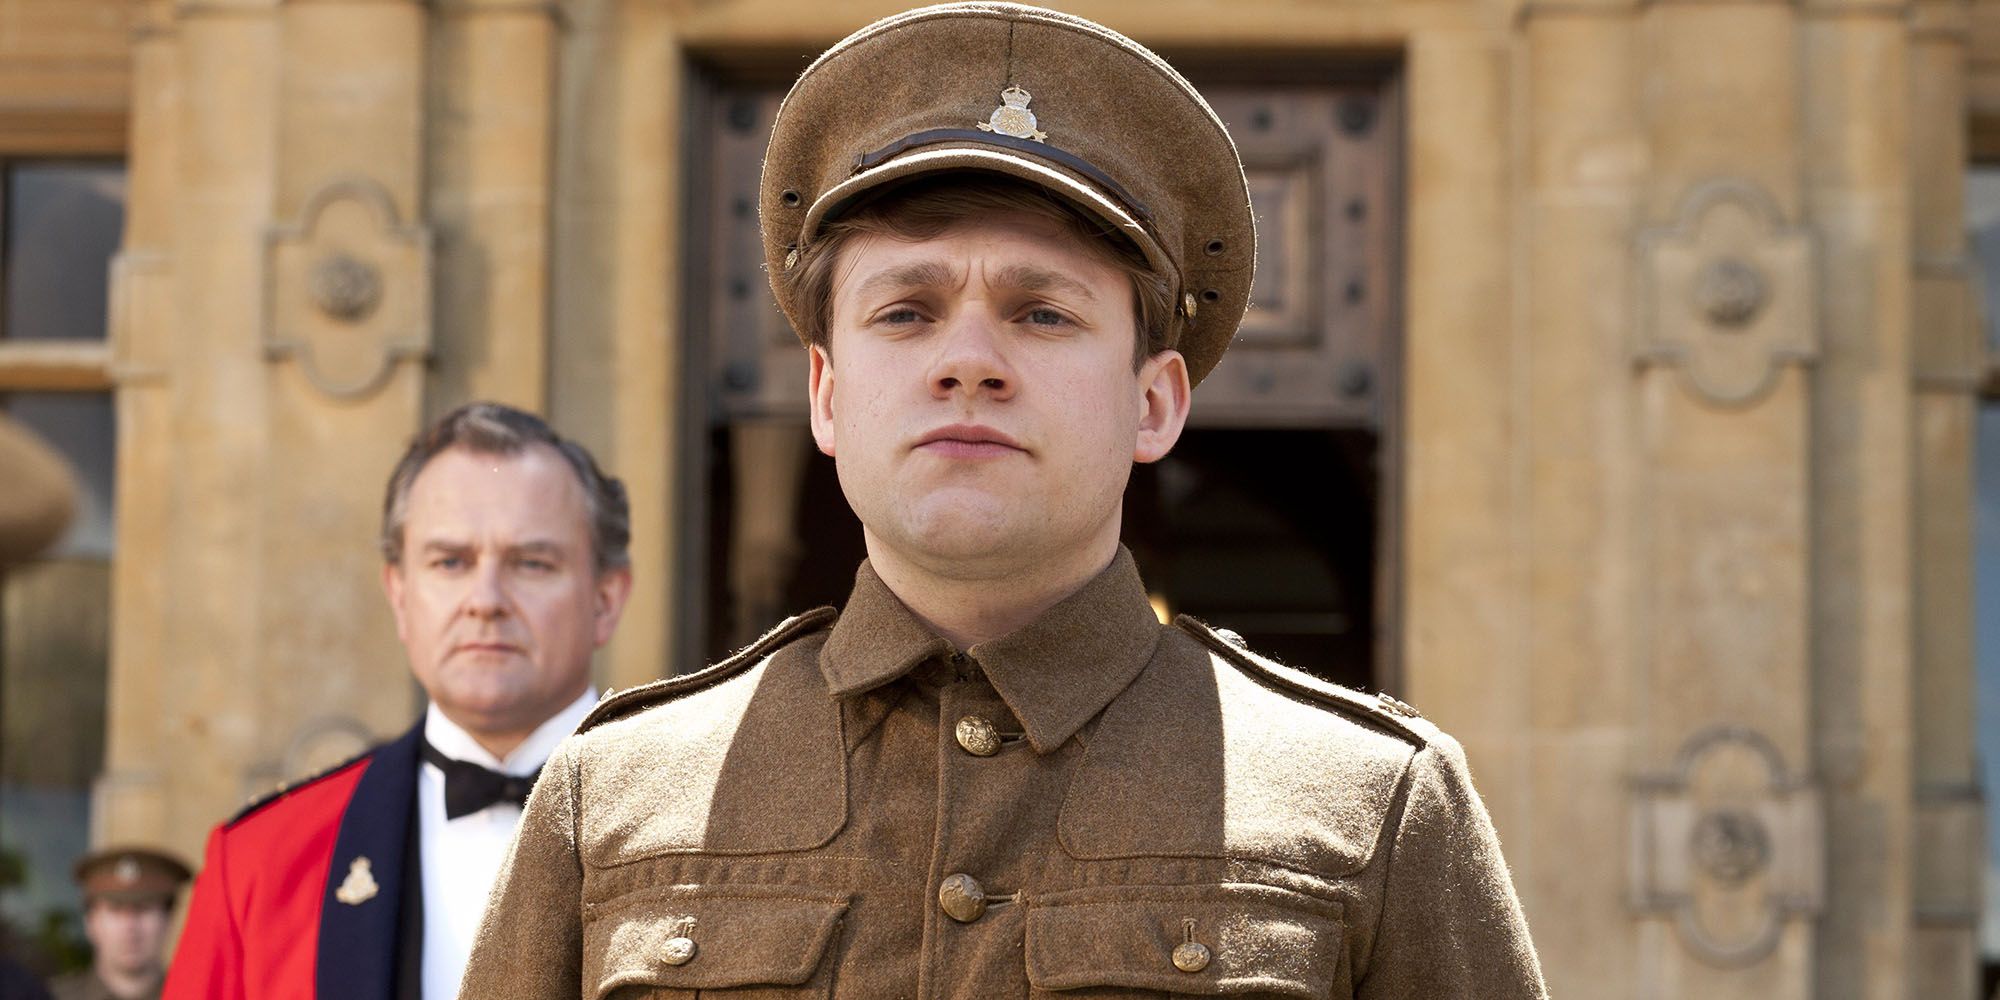 William stands in front of a manor in Downton Abbey.